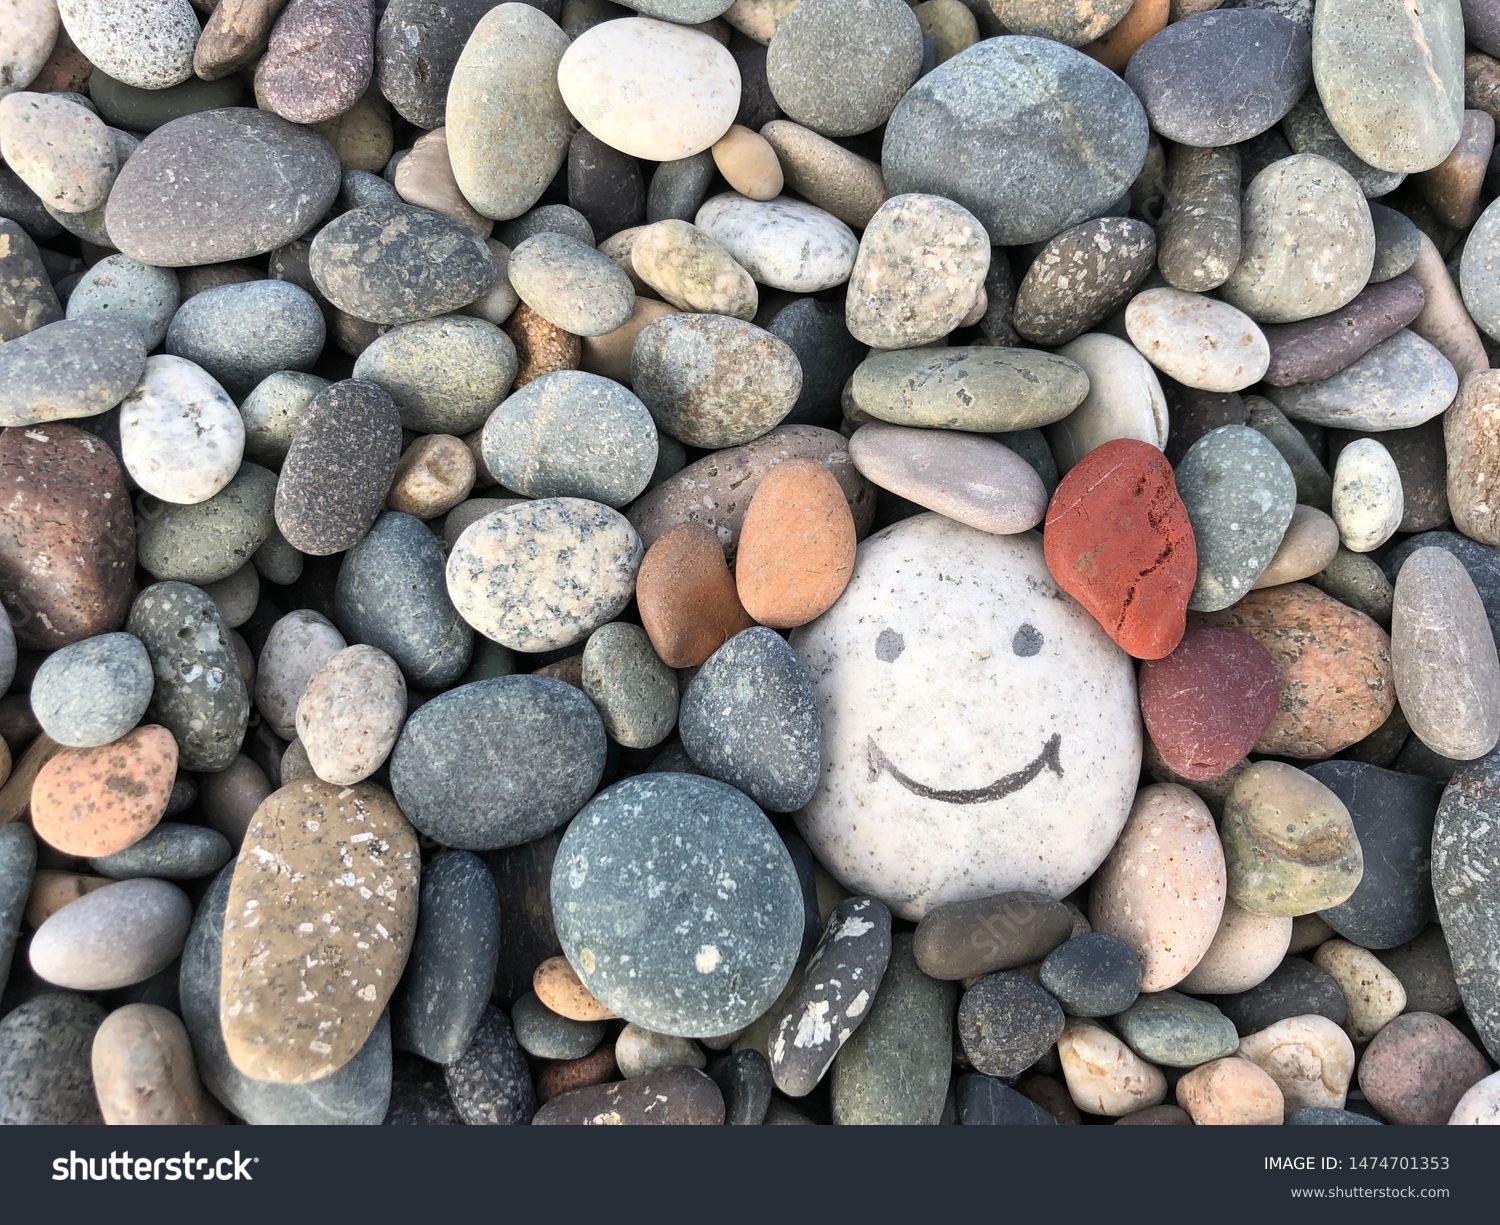 Stone with a painted smile. On the shore, one stone stands out from the others. On a small stone is an image of a happy face. Concept: joy, happiness, positive, kindness. #1474701353